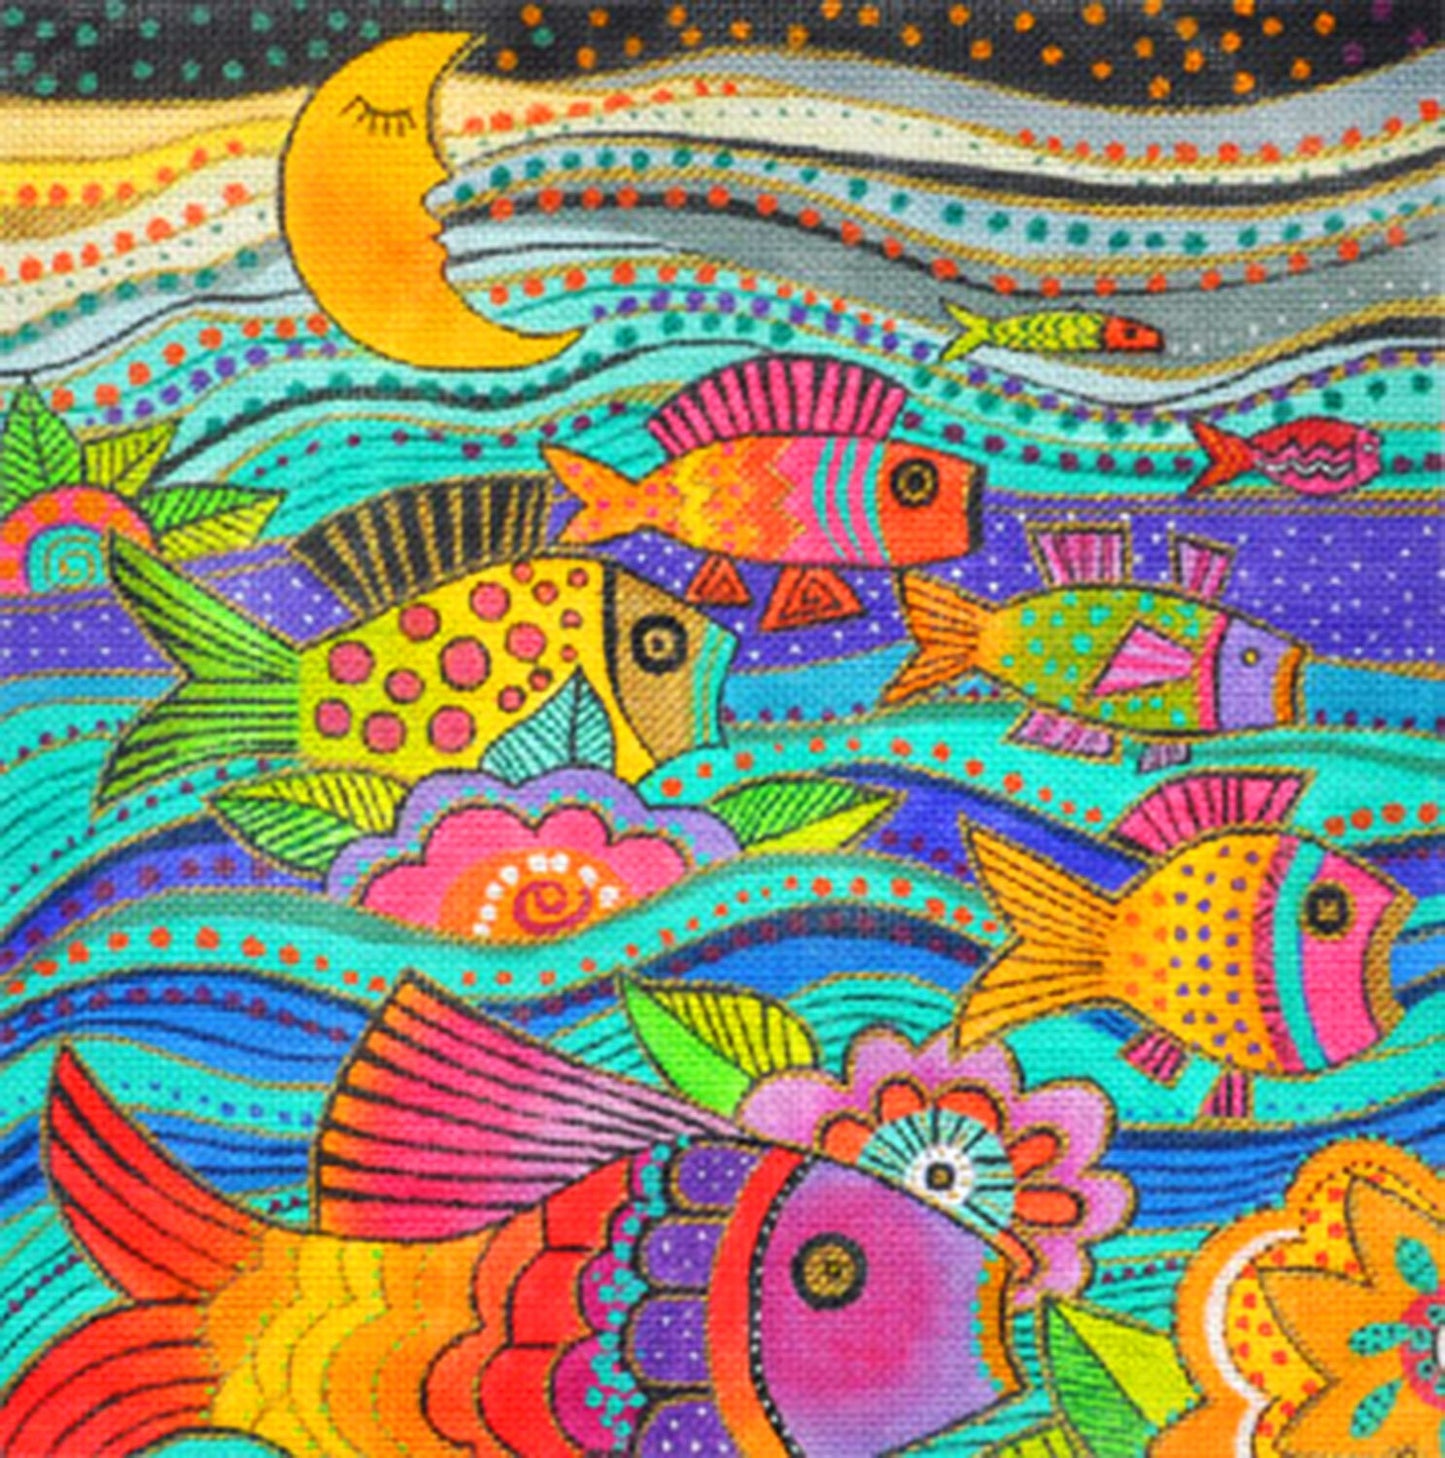 Laurel Burch Fanciful Fish large Handpainted Needlepoint Canvas by Danji Designs